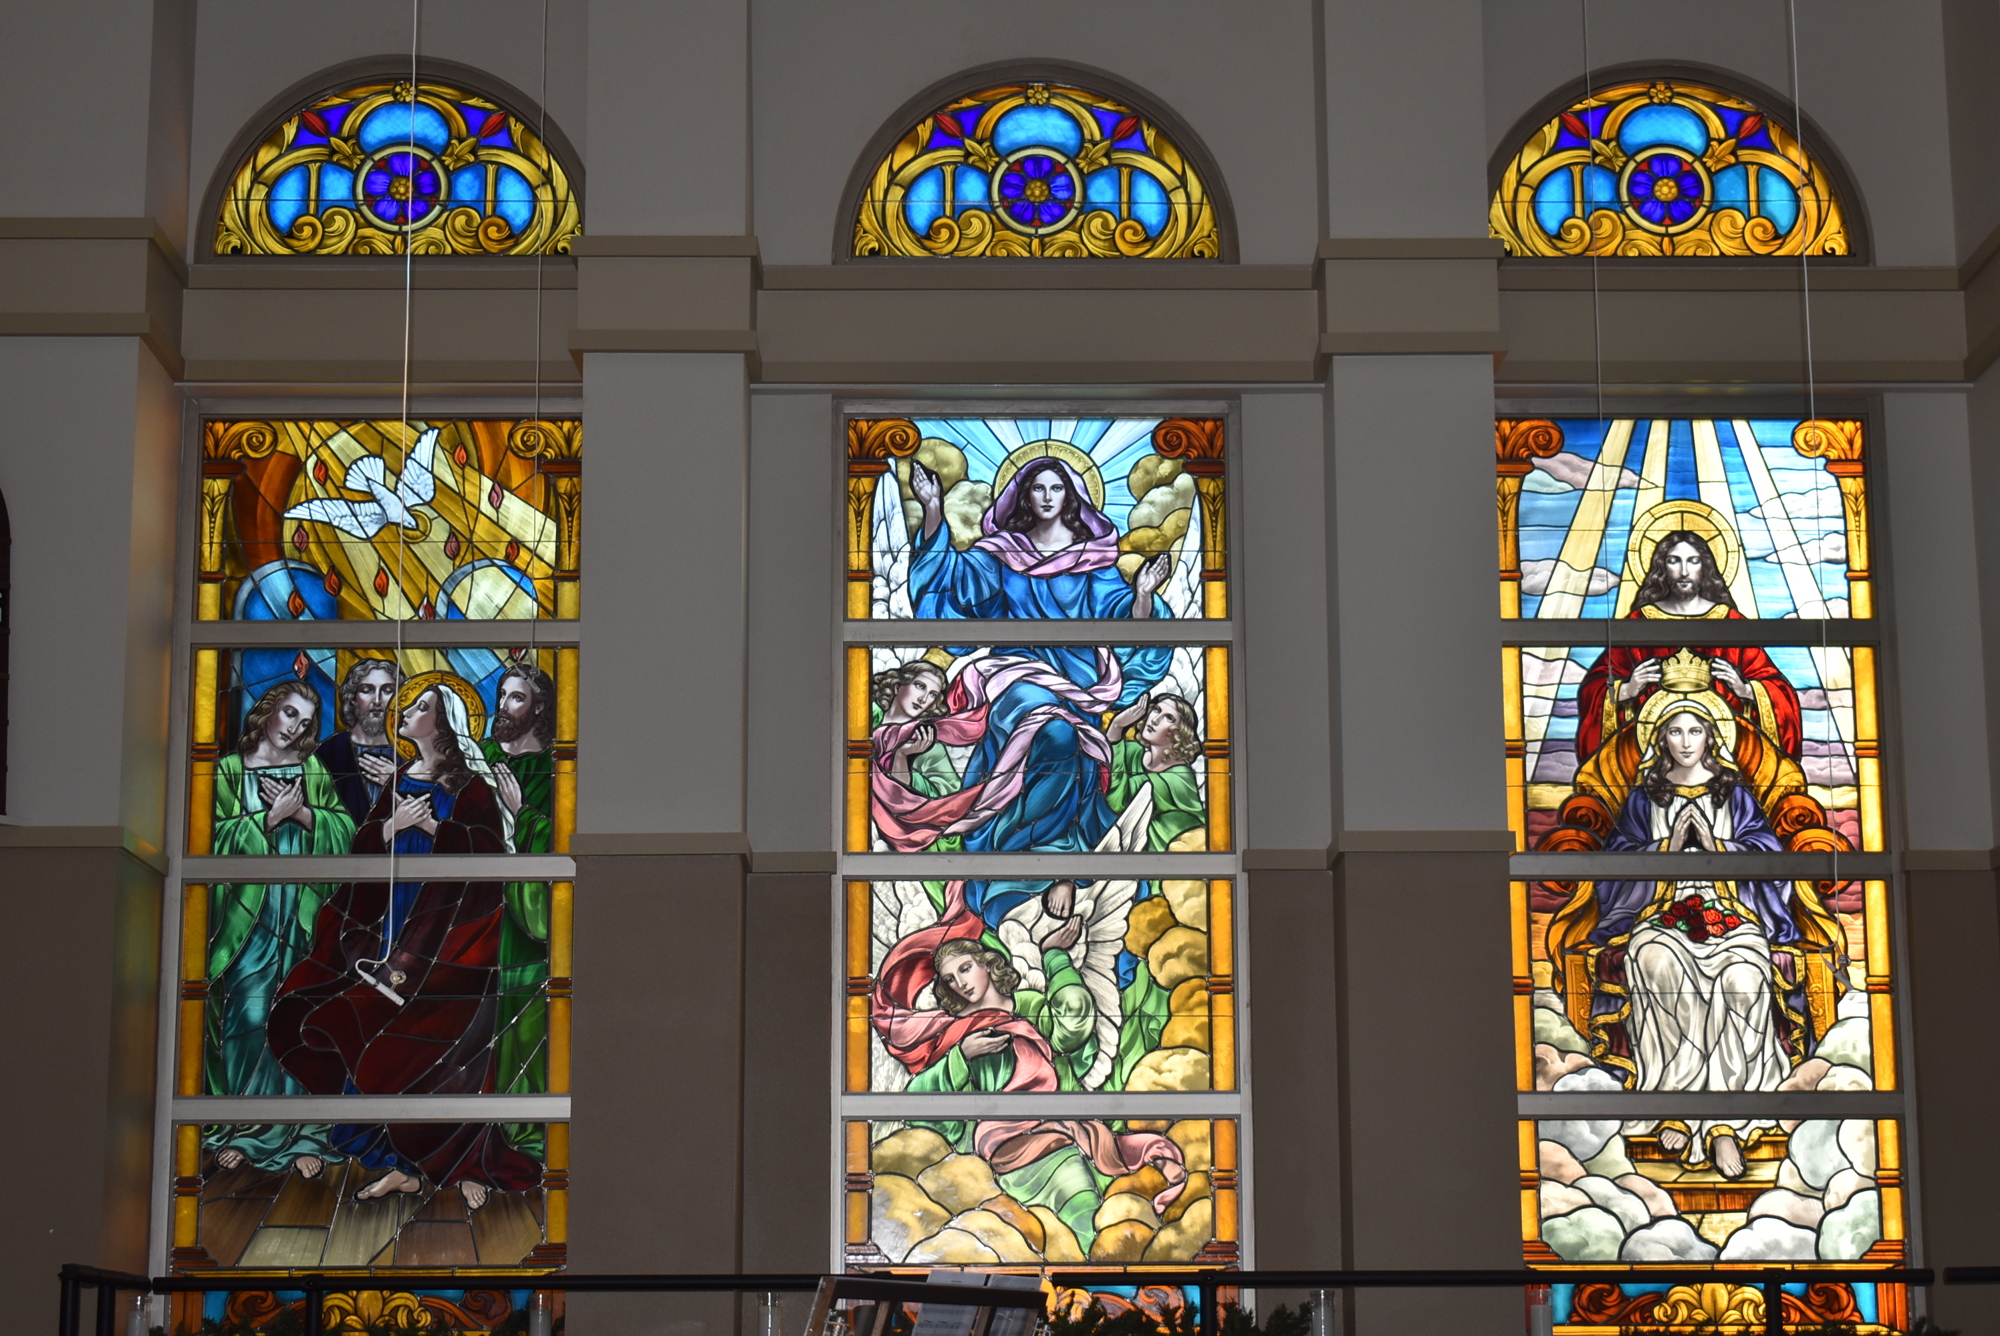 These stained glass windows, installed at Our Lady of the Angels in 2020, depict the descent of the Holy Spirit onto the Apostles (also known as Pentecost), assumption of Mary into Heaven and coronation of Mary in Heaven.